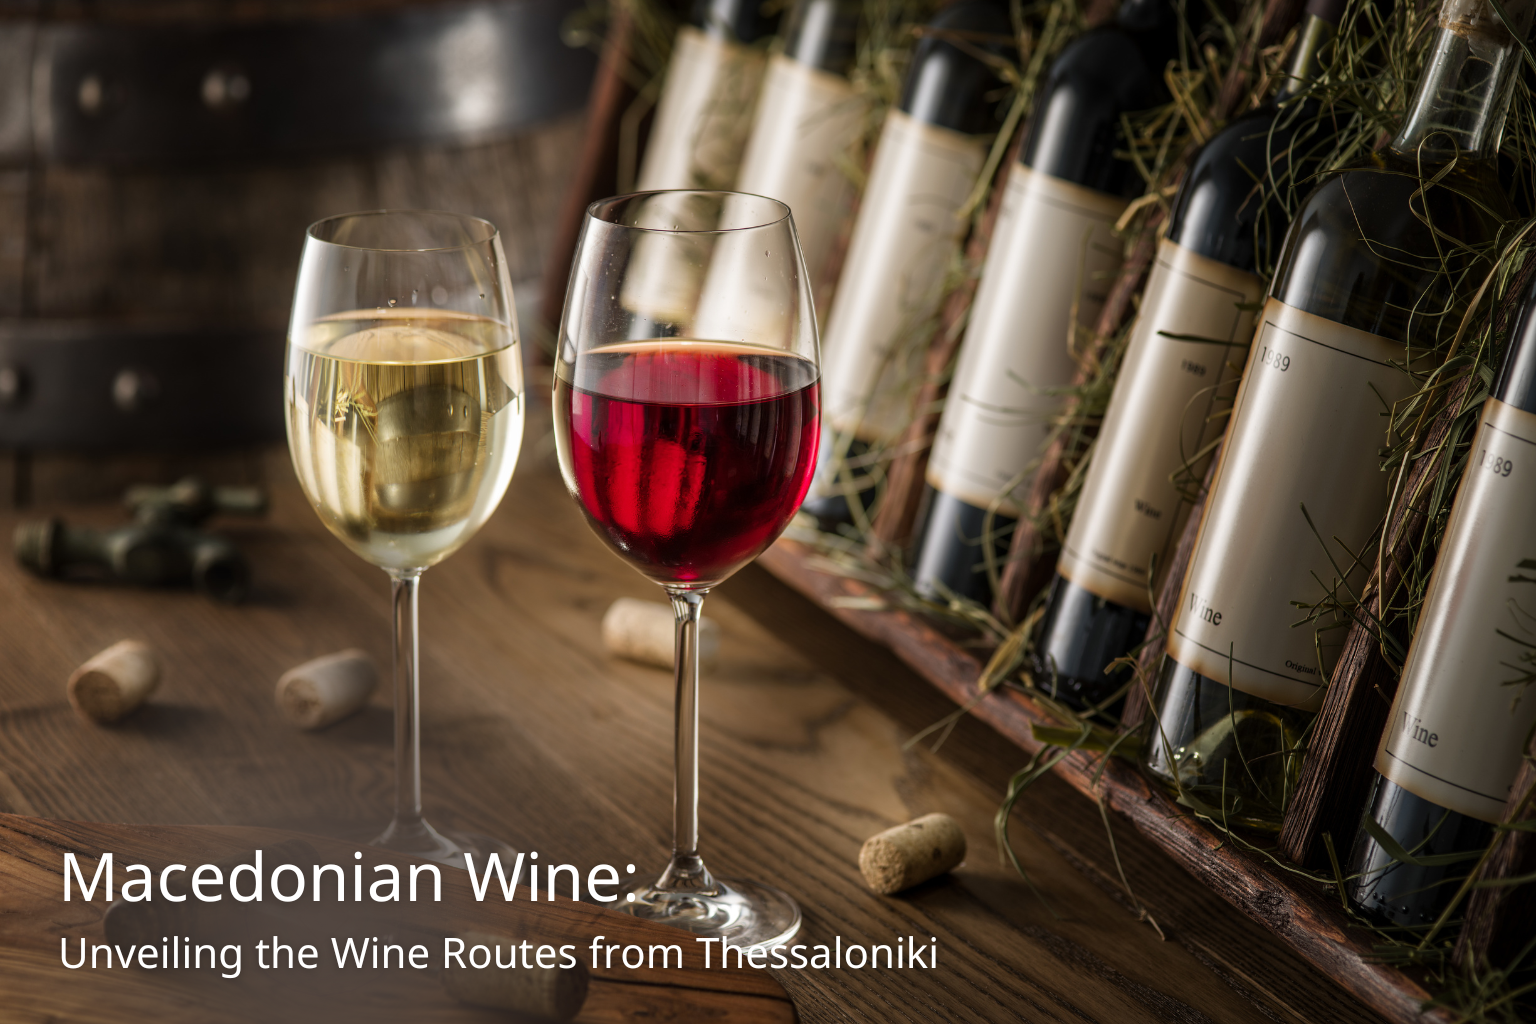 unveiling-the-wine-routes-from-thessaloniki